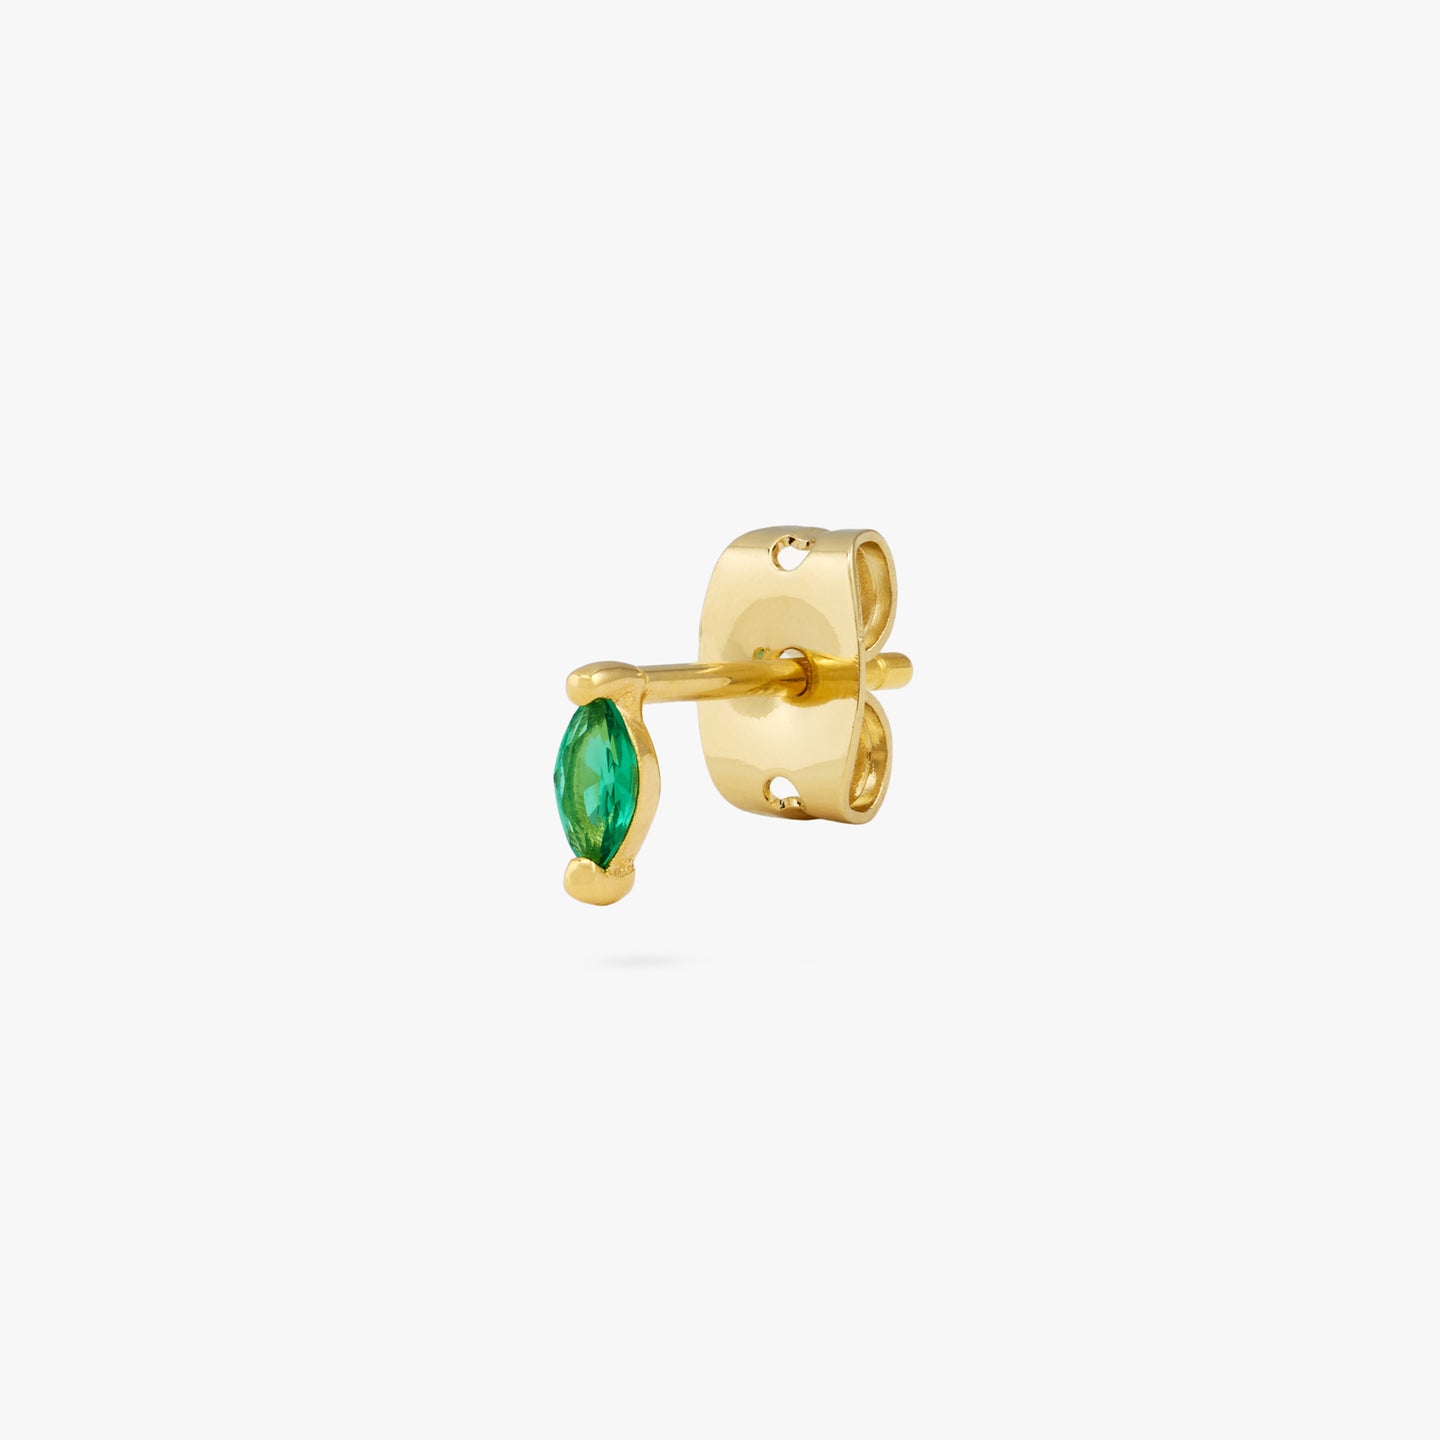 The marquise mini stud features a green oblong shaped gem and has gold accents color:null|gold/green